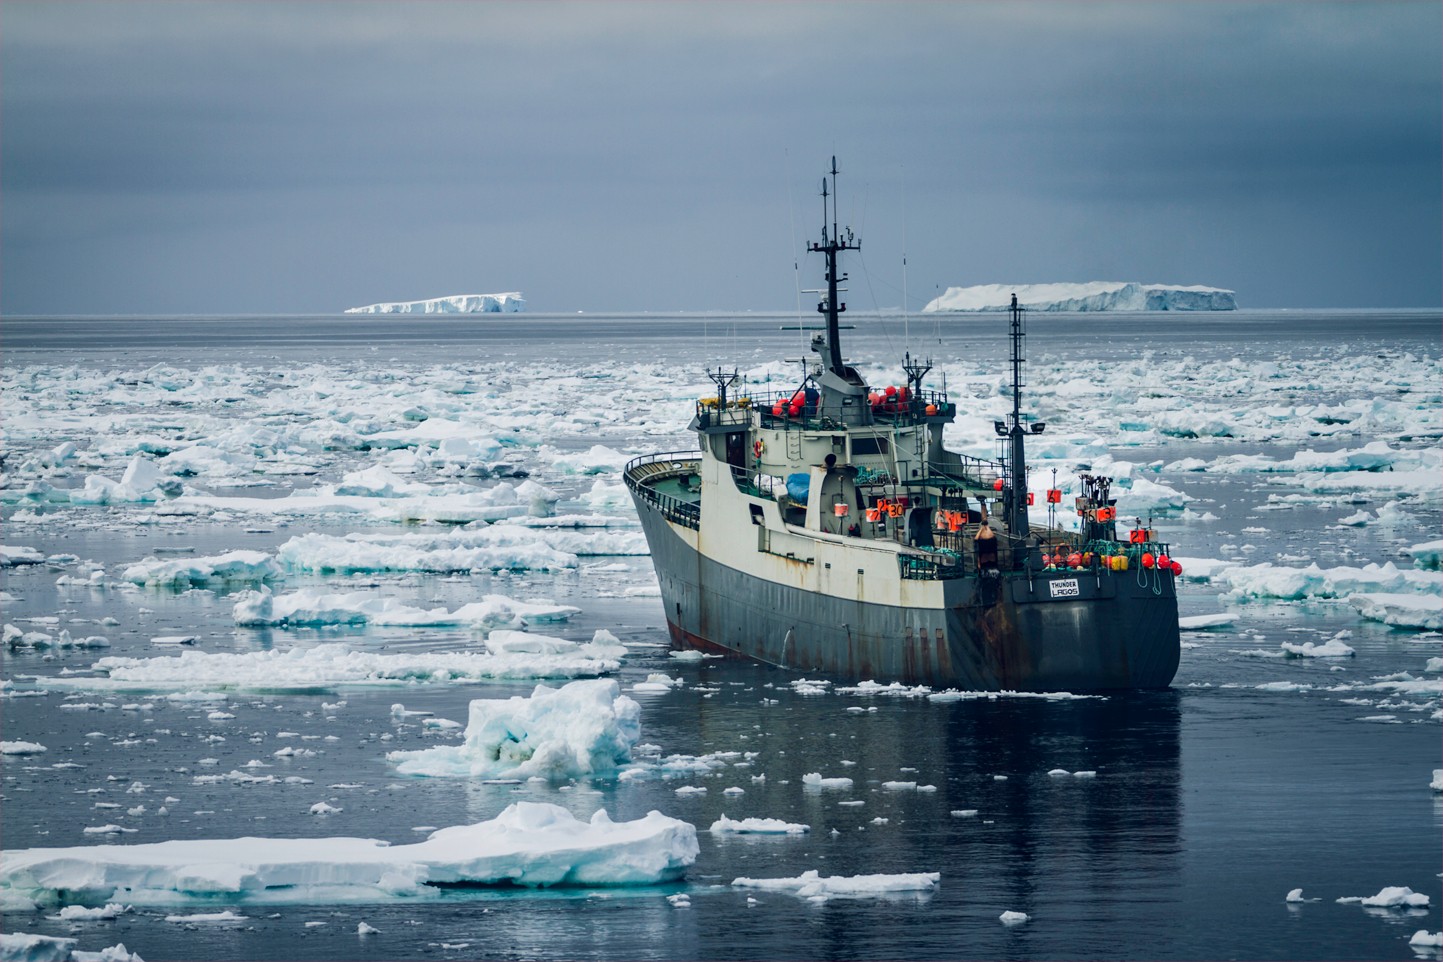 The toothfish poaching vessel, Thunder, in the ice fields of the Antarctic Ocean. Picture: Simon Ager/Sea Shepherd